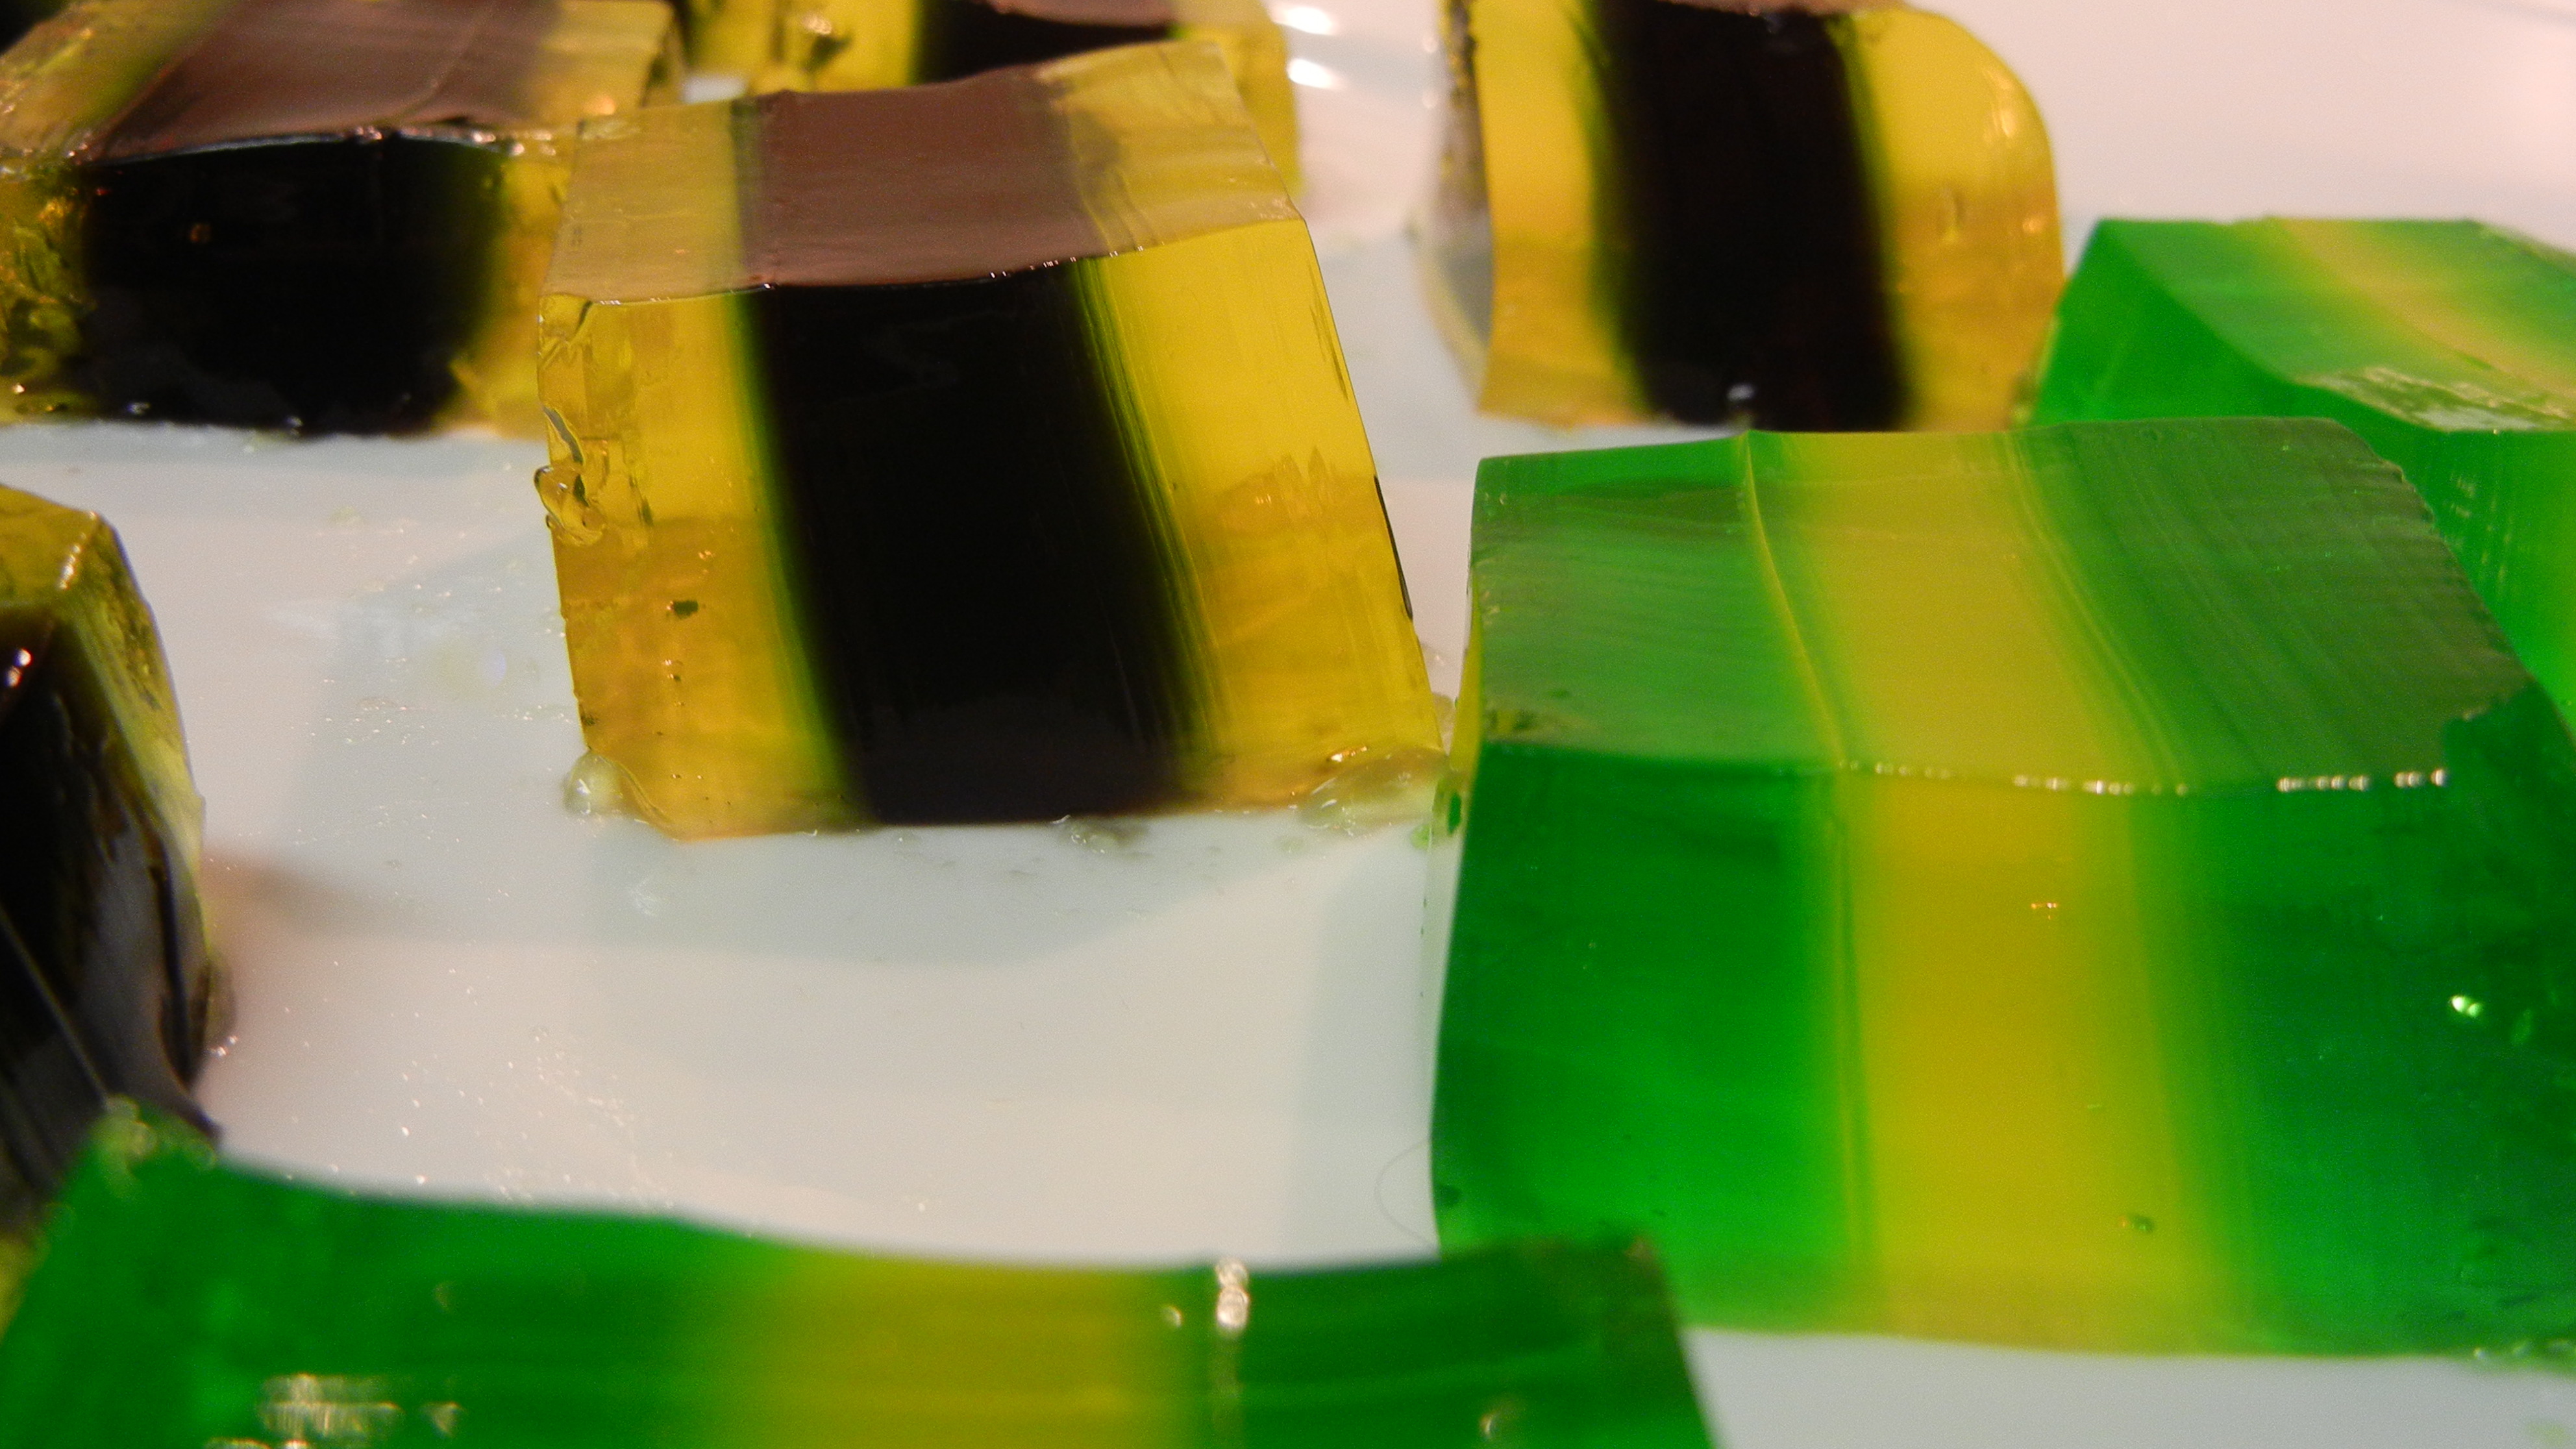 Guest post over on SB Nation today! Steelers and Packers Jelly Jello Shots and Texas Rose Punch for the Super Bowl